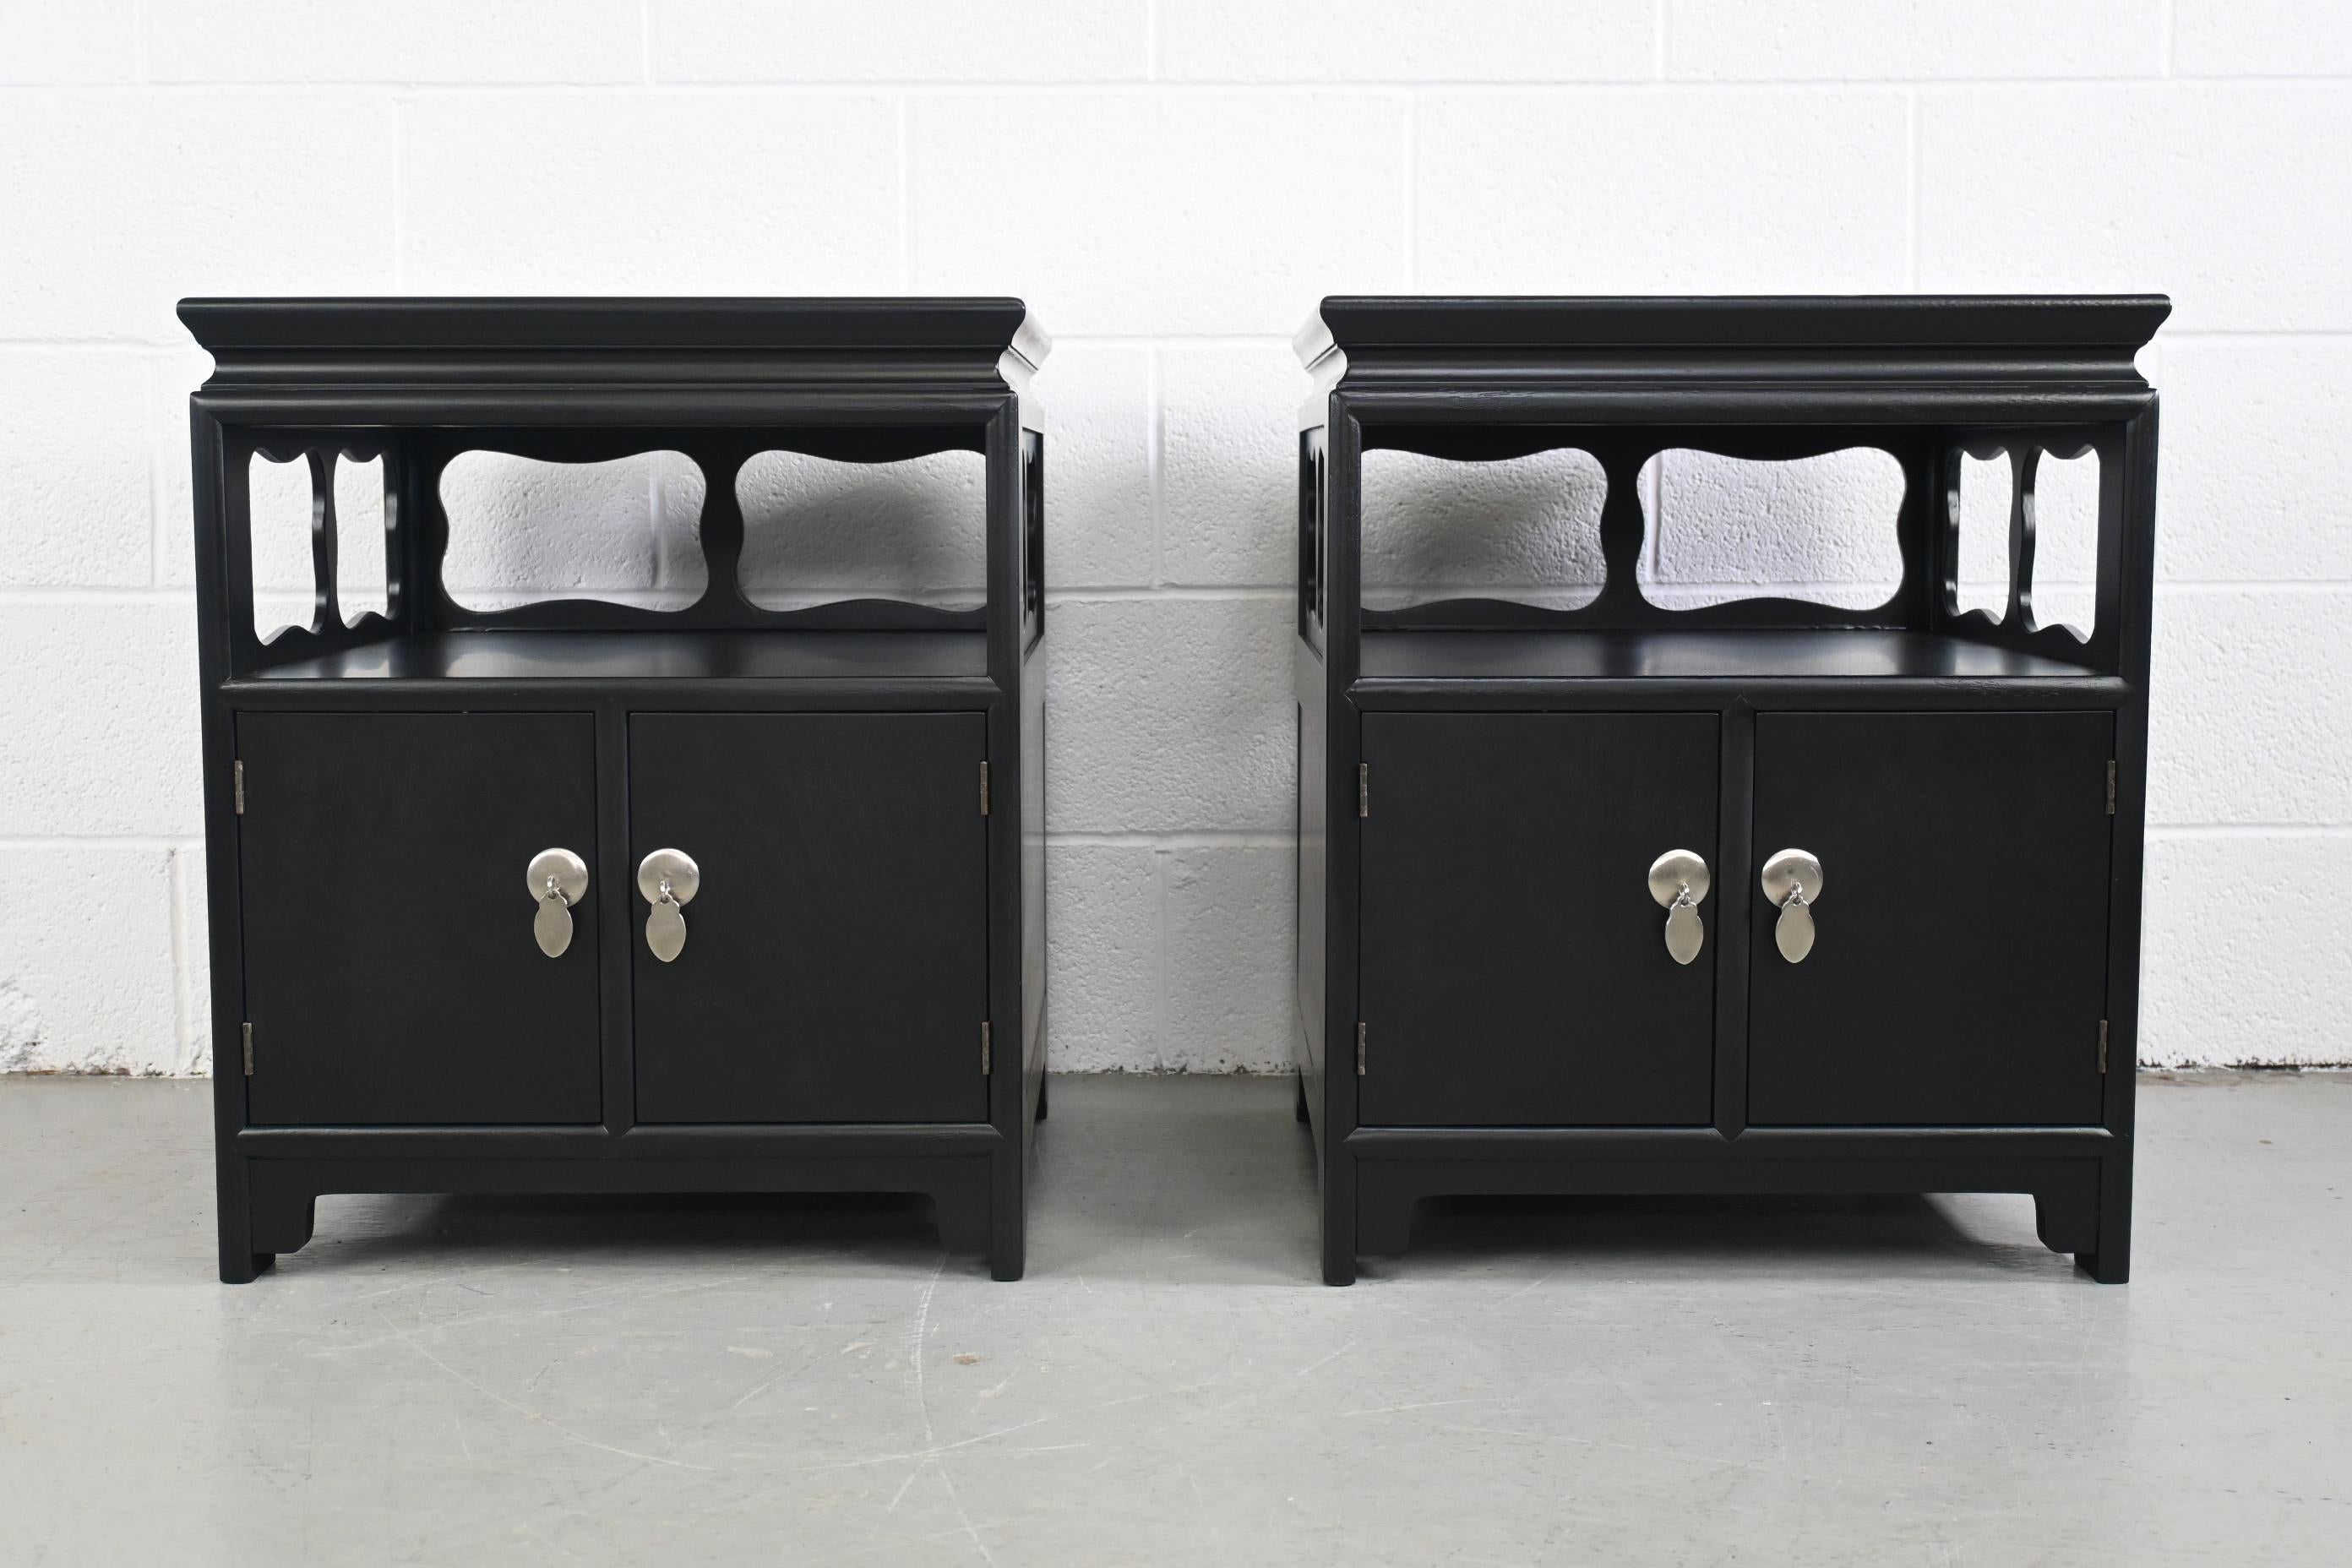 Michael Taylor for baker far east black lacquered mid century pair of nightstands or end tables

Baker Furniture, USA, 1960s

Measures: 20 Wide x 20 Deep x 24 High.

Mid century style pair of black lacquered nightstands or end tables with